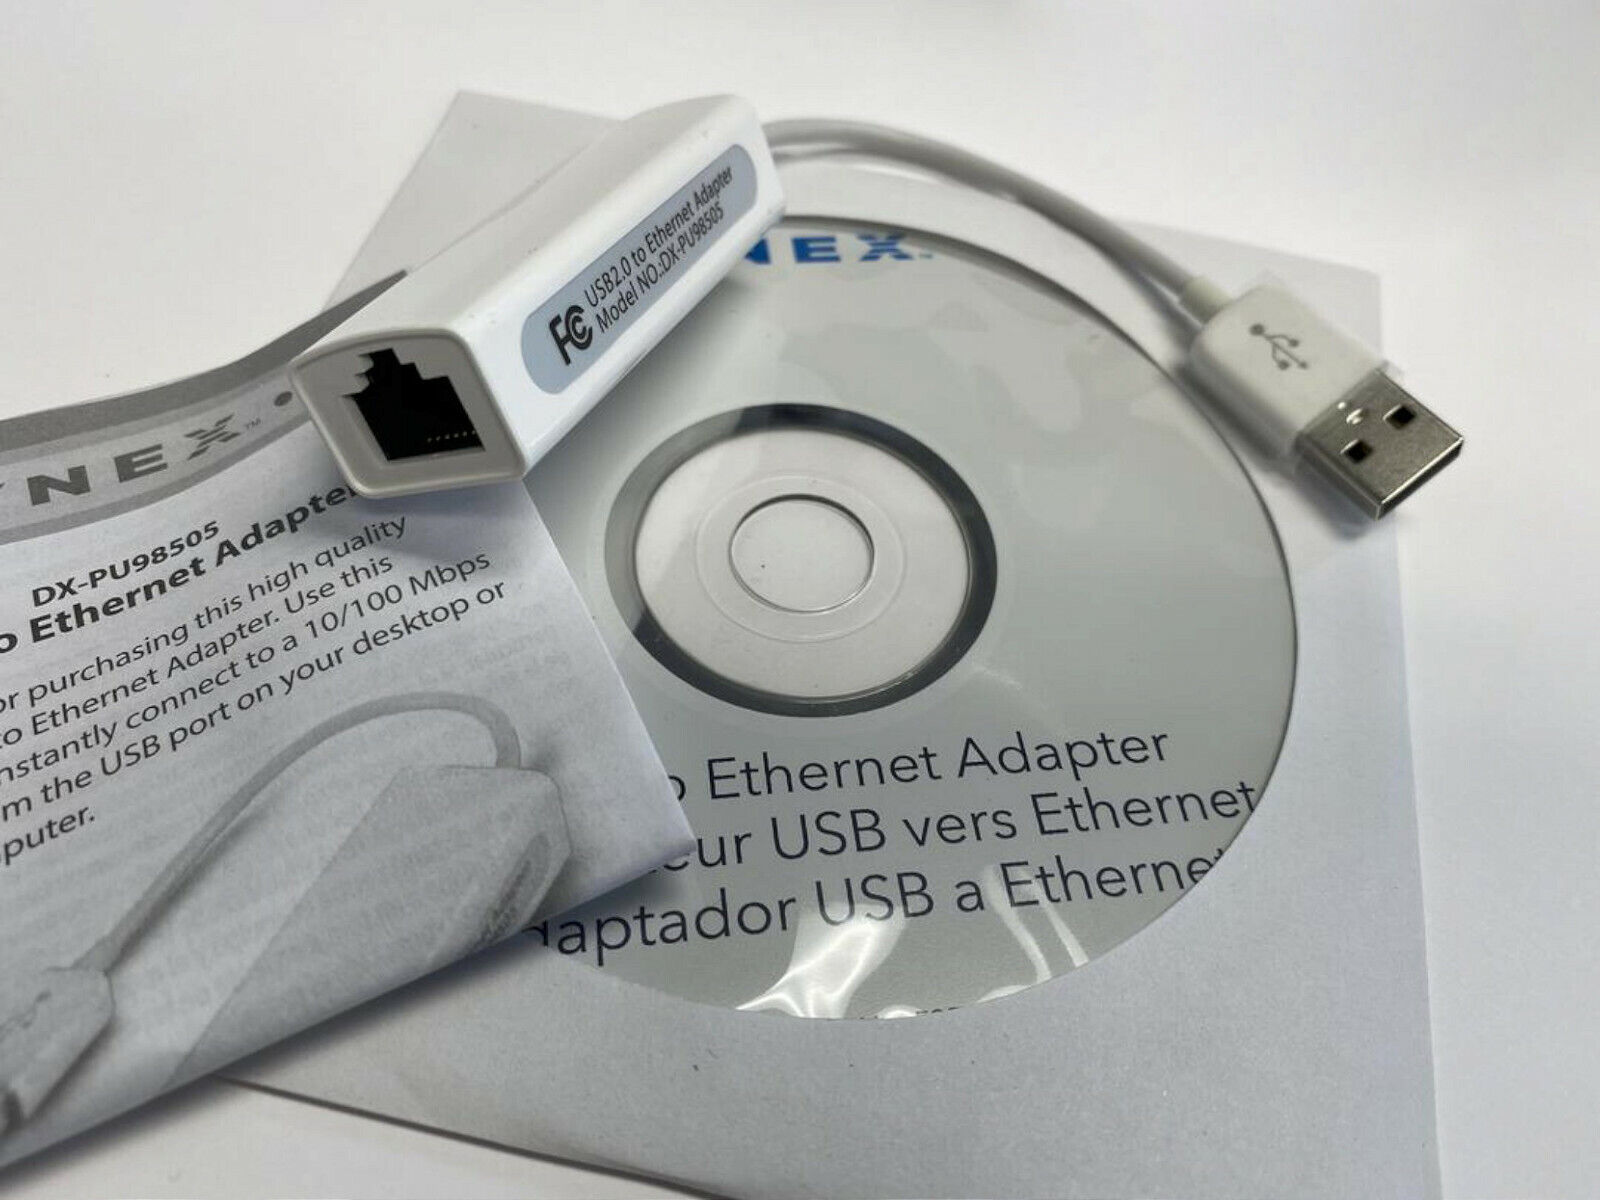 NEW Dynex DX-PU98505 USB 2.0-to-Ethernet Adapter 10 Mbps White network LAN